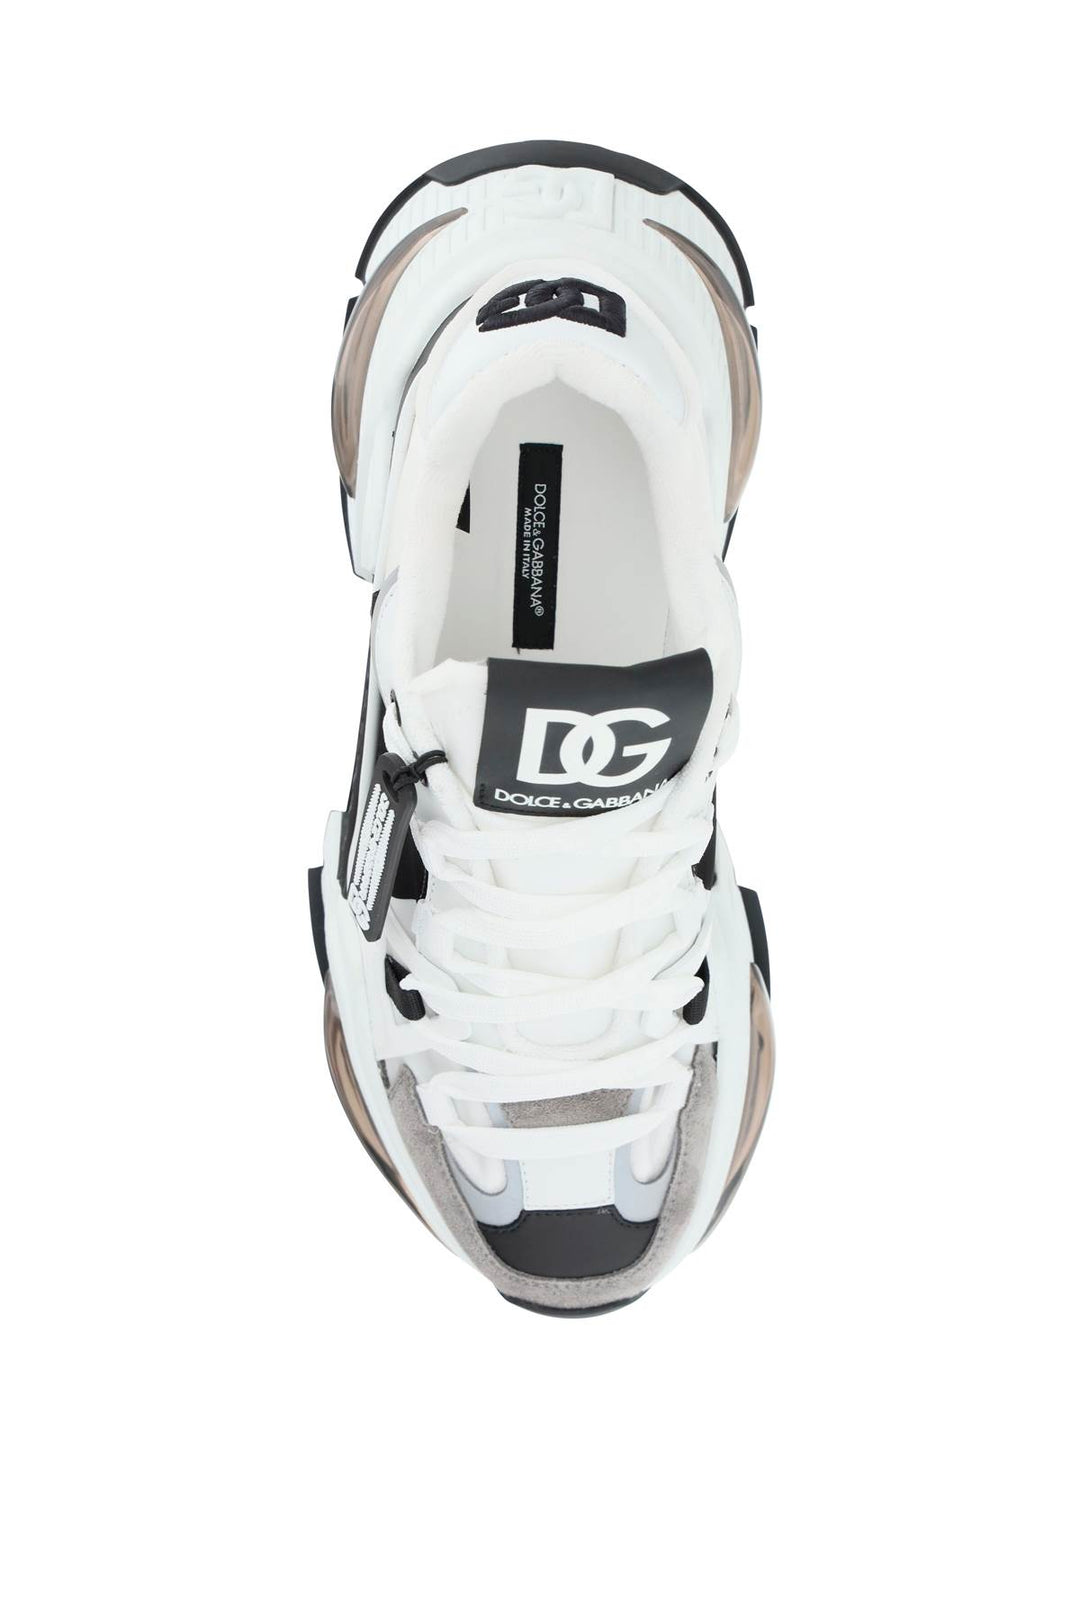 Dolce & Gabbana Air Master Sneakers   White